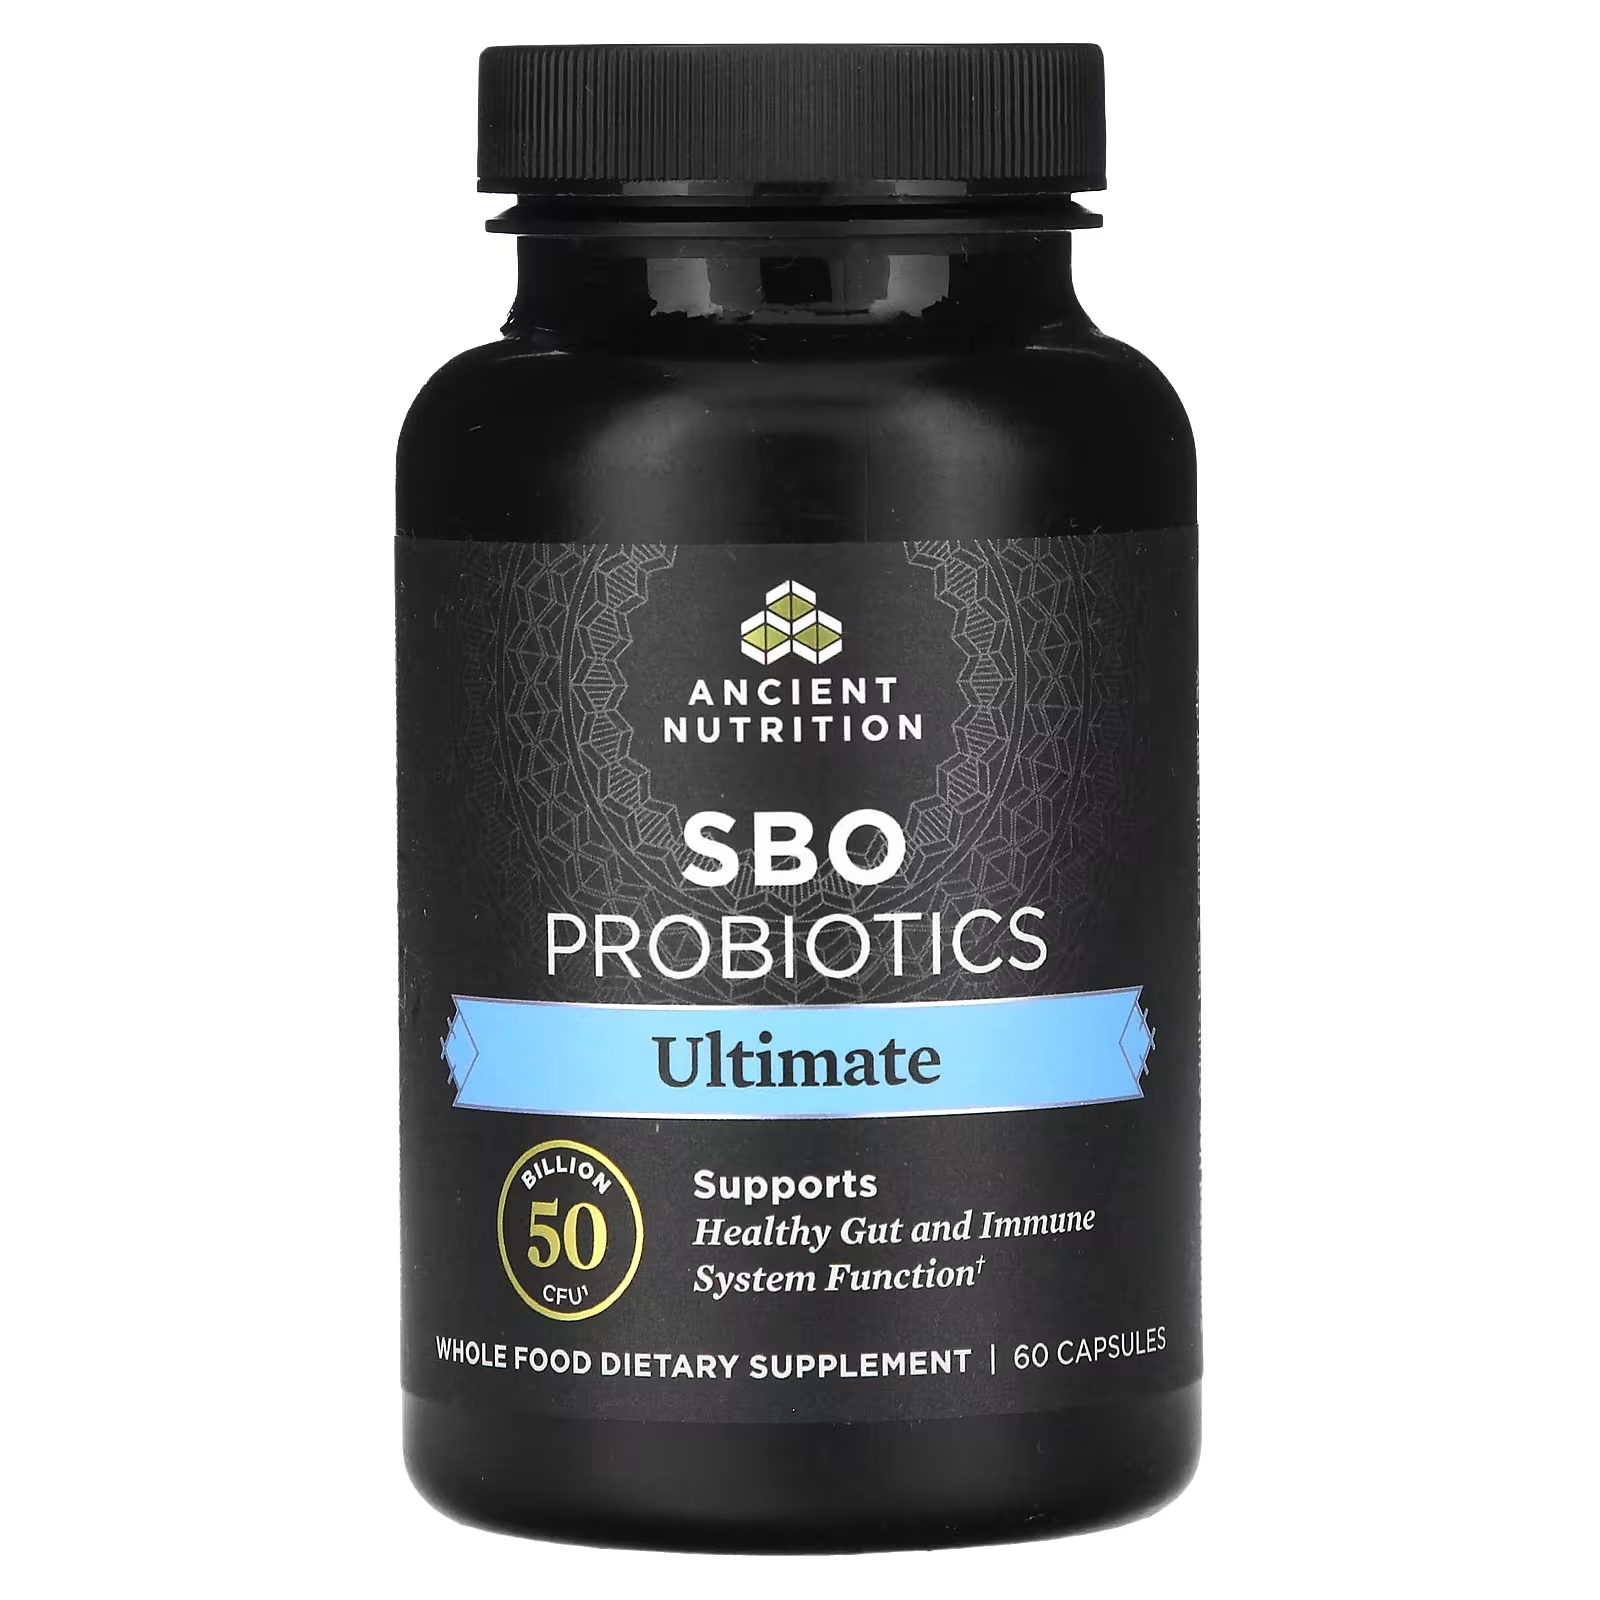 Ancient Nutrition SBO Probiotics Ultimate 50 миллиардов КОЕ, 60 капсул dr axe ancient nutrition sbo probiotics ultimate 50 млрд кое 60 капсул